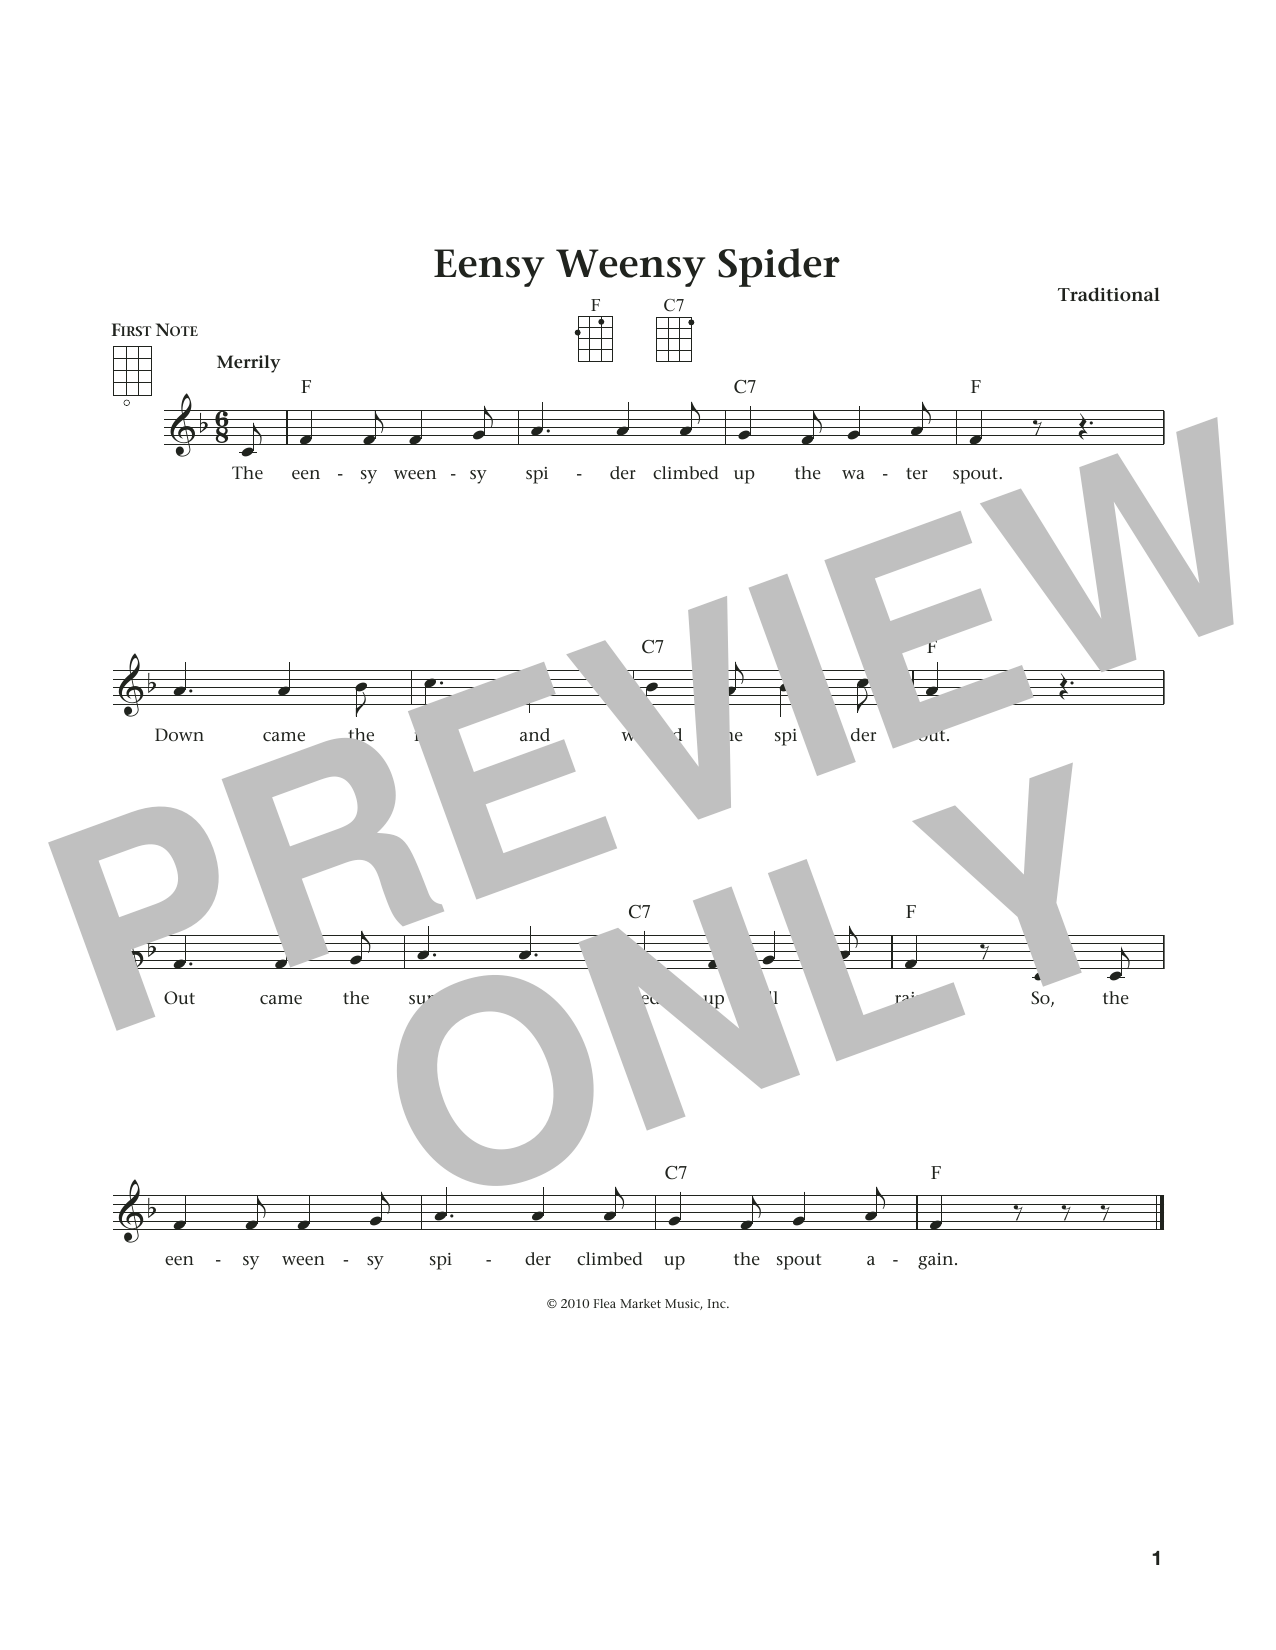 Download Traditional Eensy Weensy Spider (from The Daily Uku Sheet Music